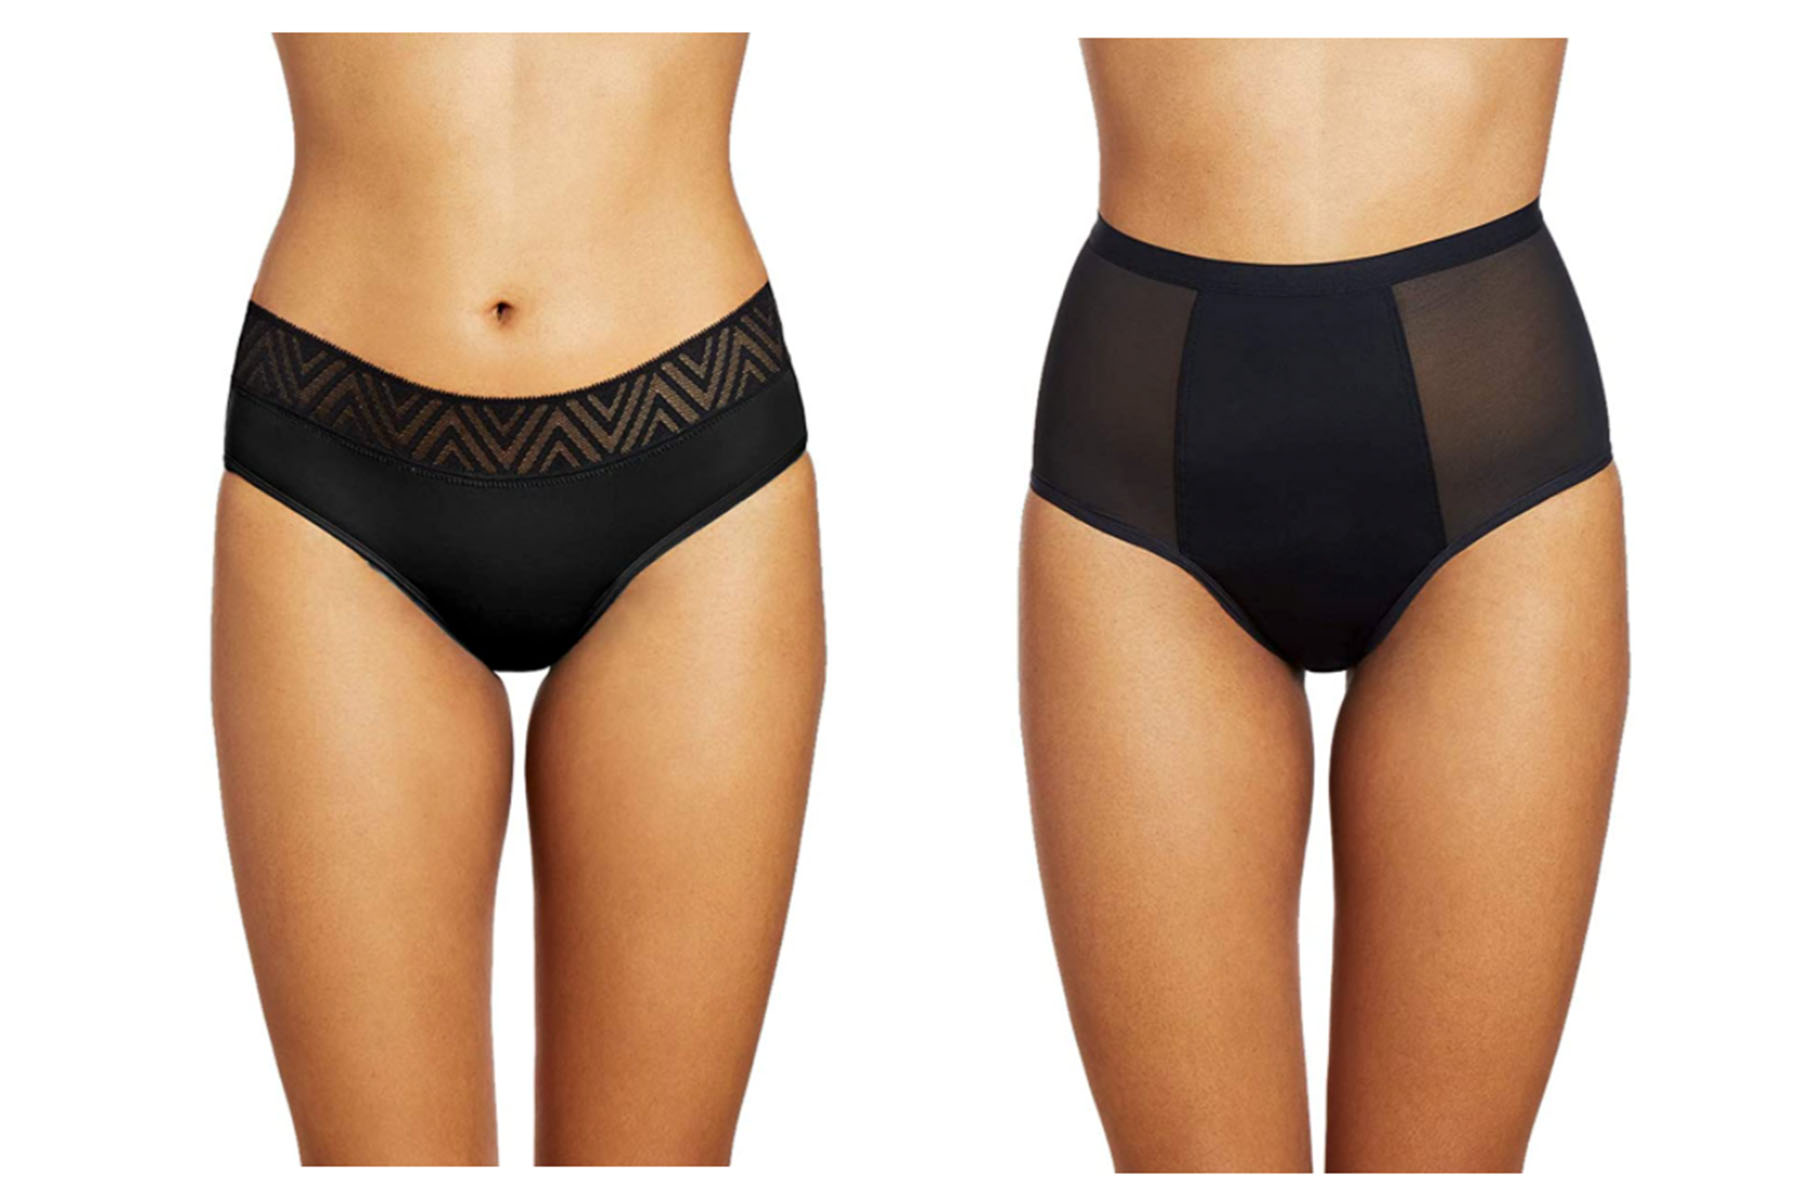 Inspiring: This Woman Spent the Pandemic Turning All of Her Underwear Into Period  Underwear